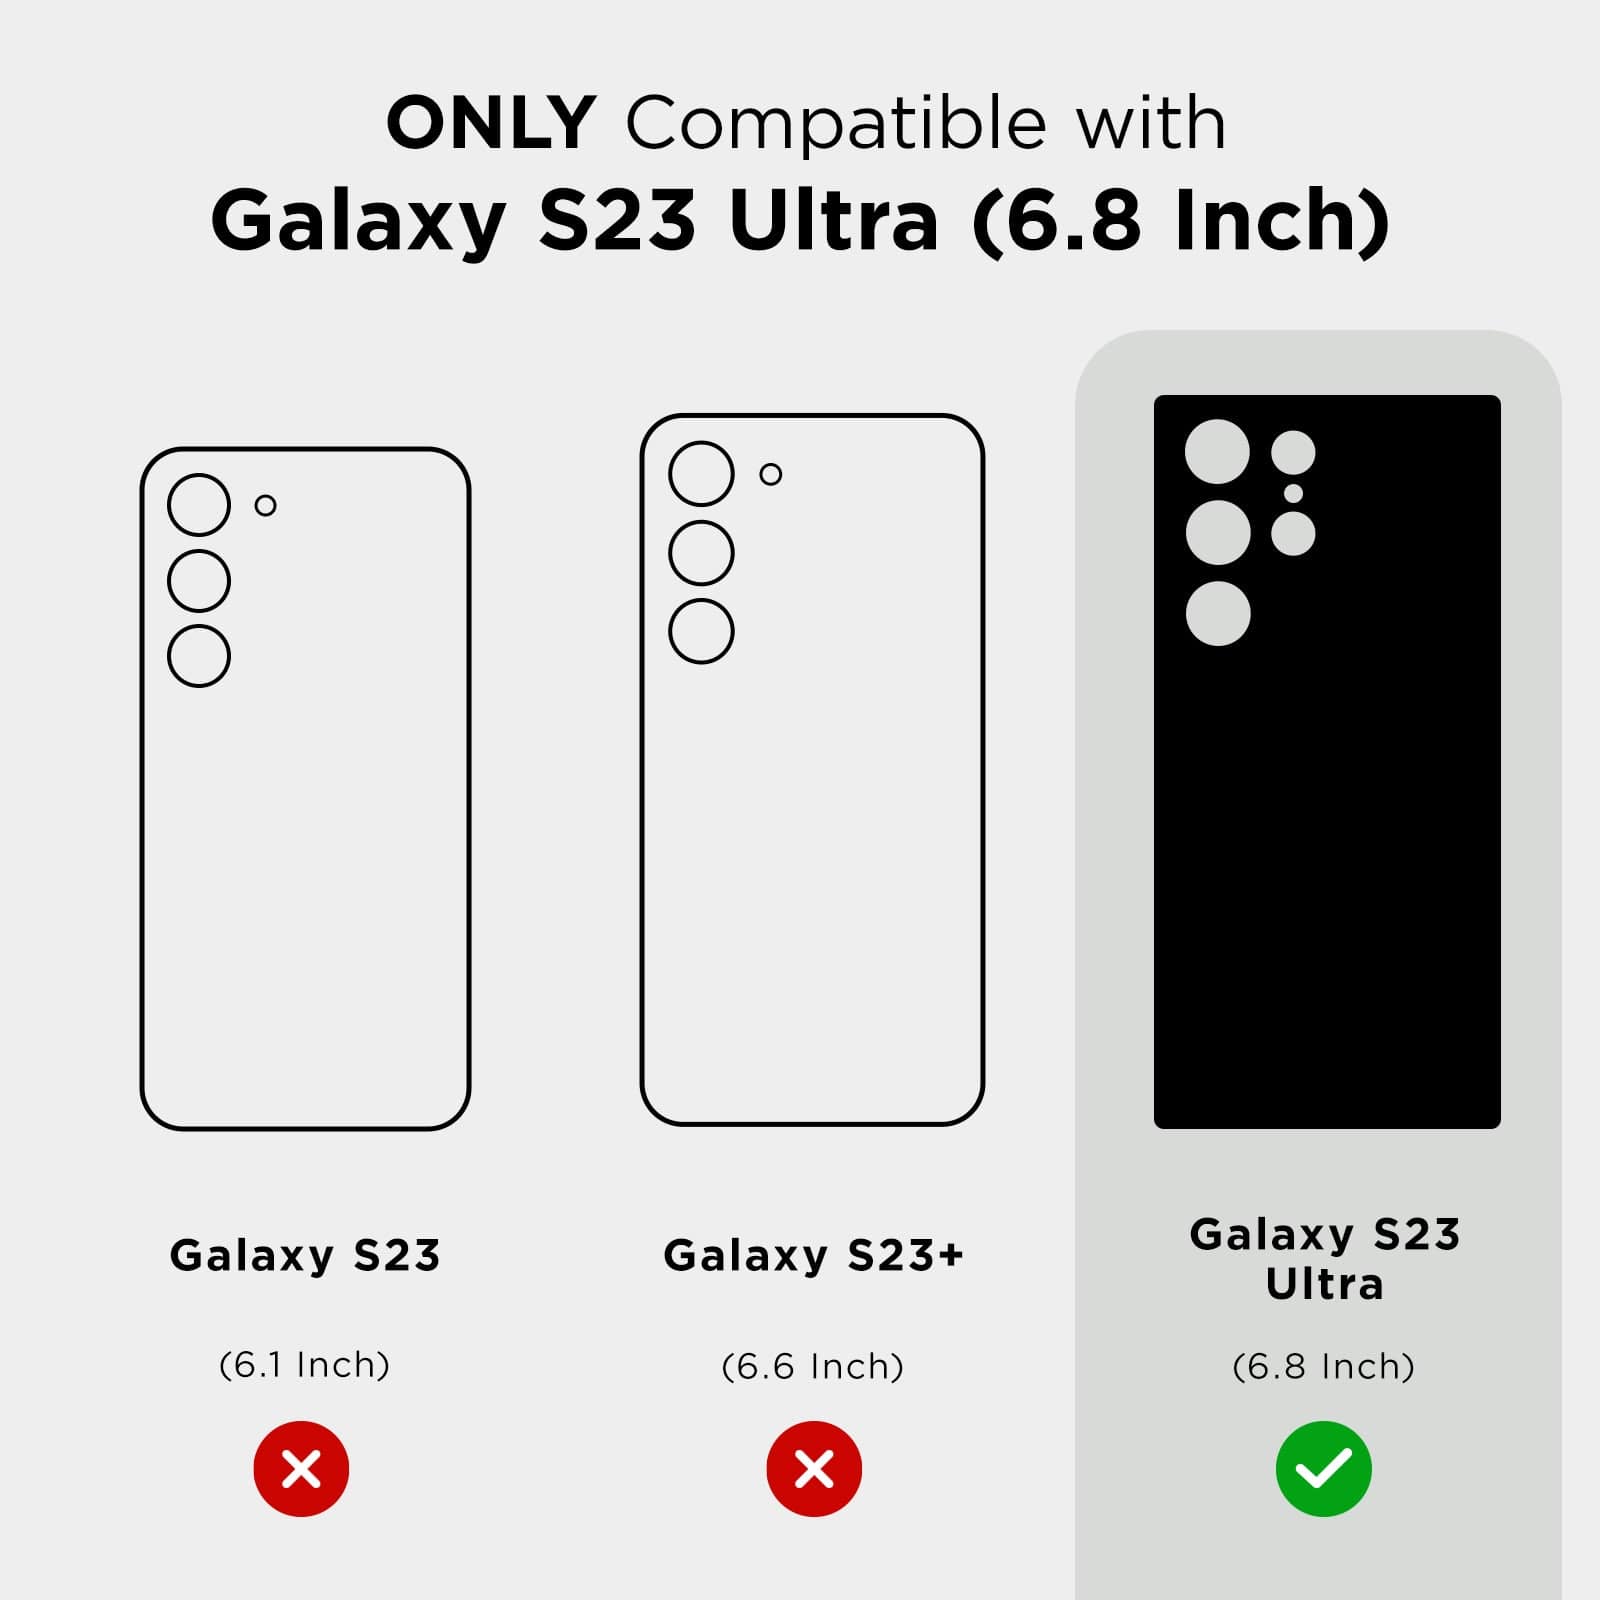 ONLY COMPATIBLE WITH GALAXY S23 ULTRA.